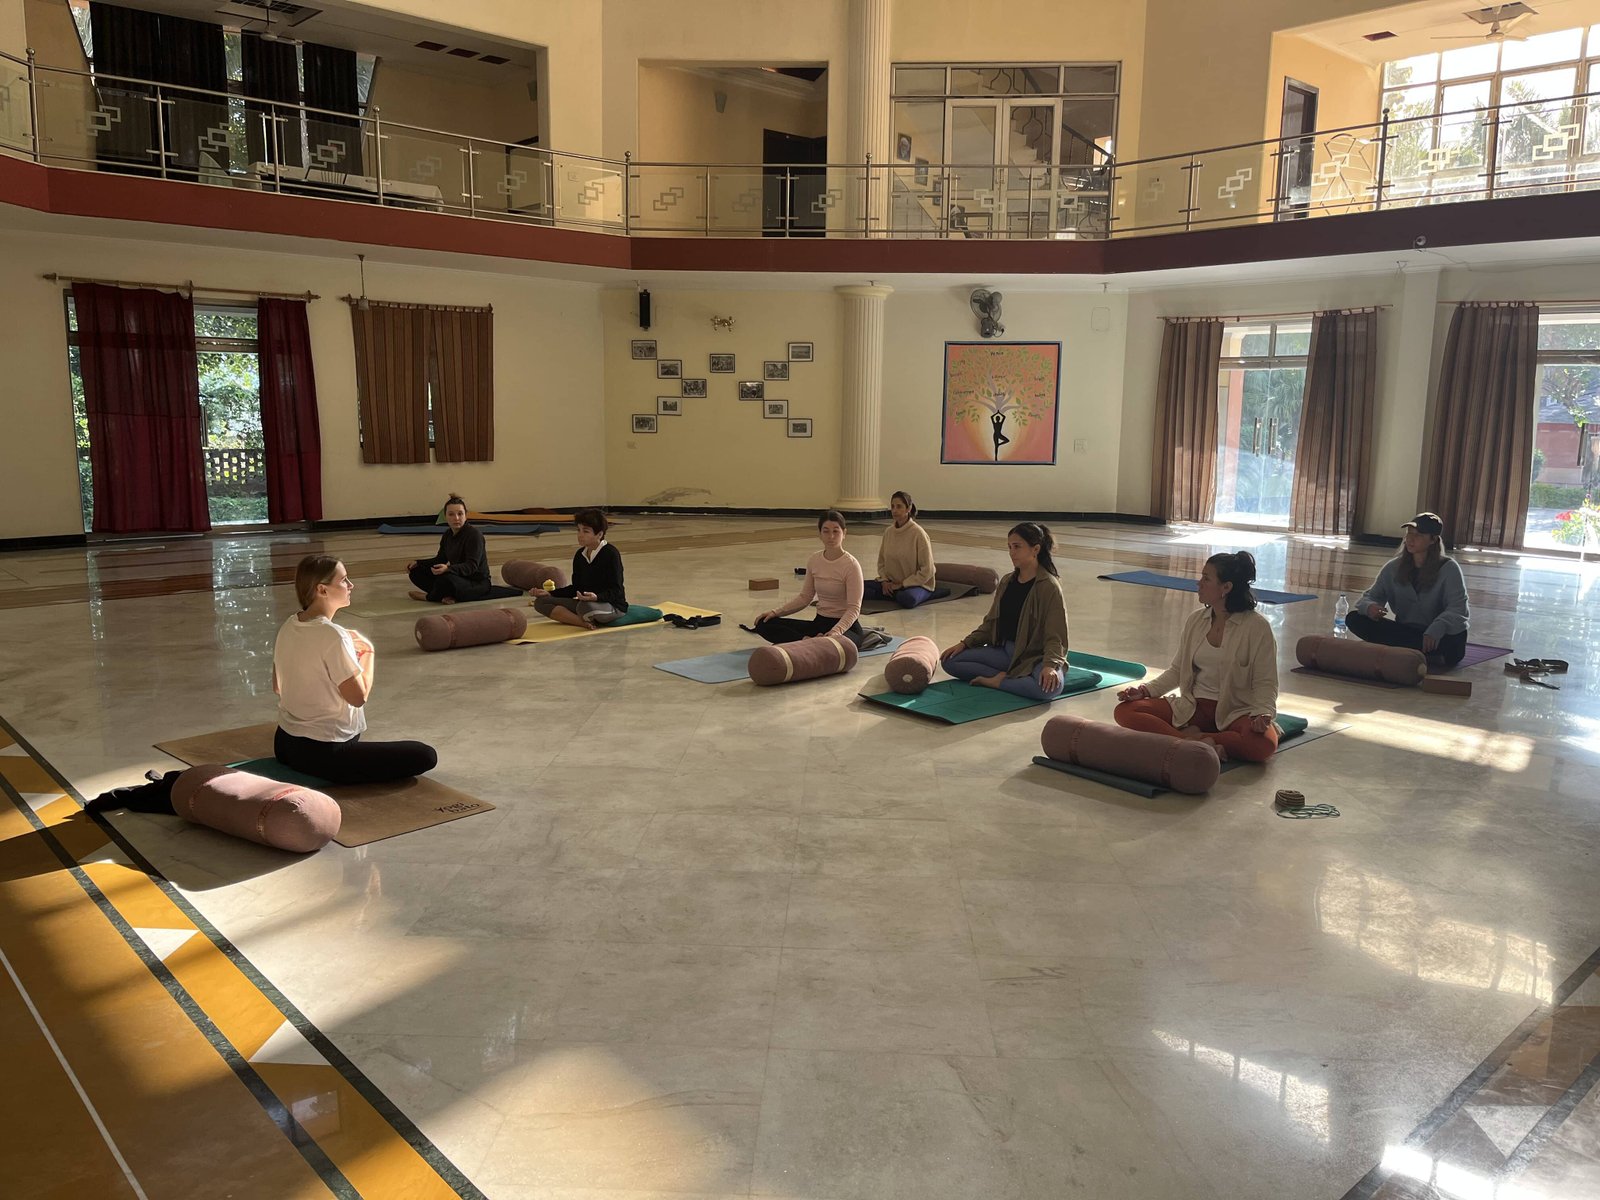 Our 200-hour Hatha Yoga teacher training course covers all the essential  elements to deepen your knowledge and practice of Yoga, from asana,  philosophy